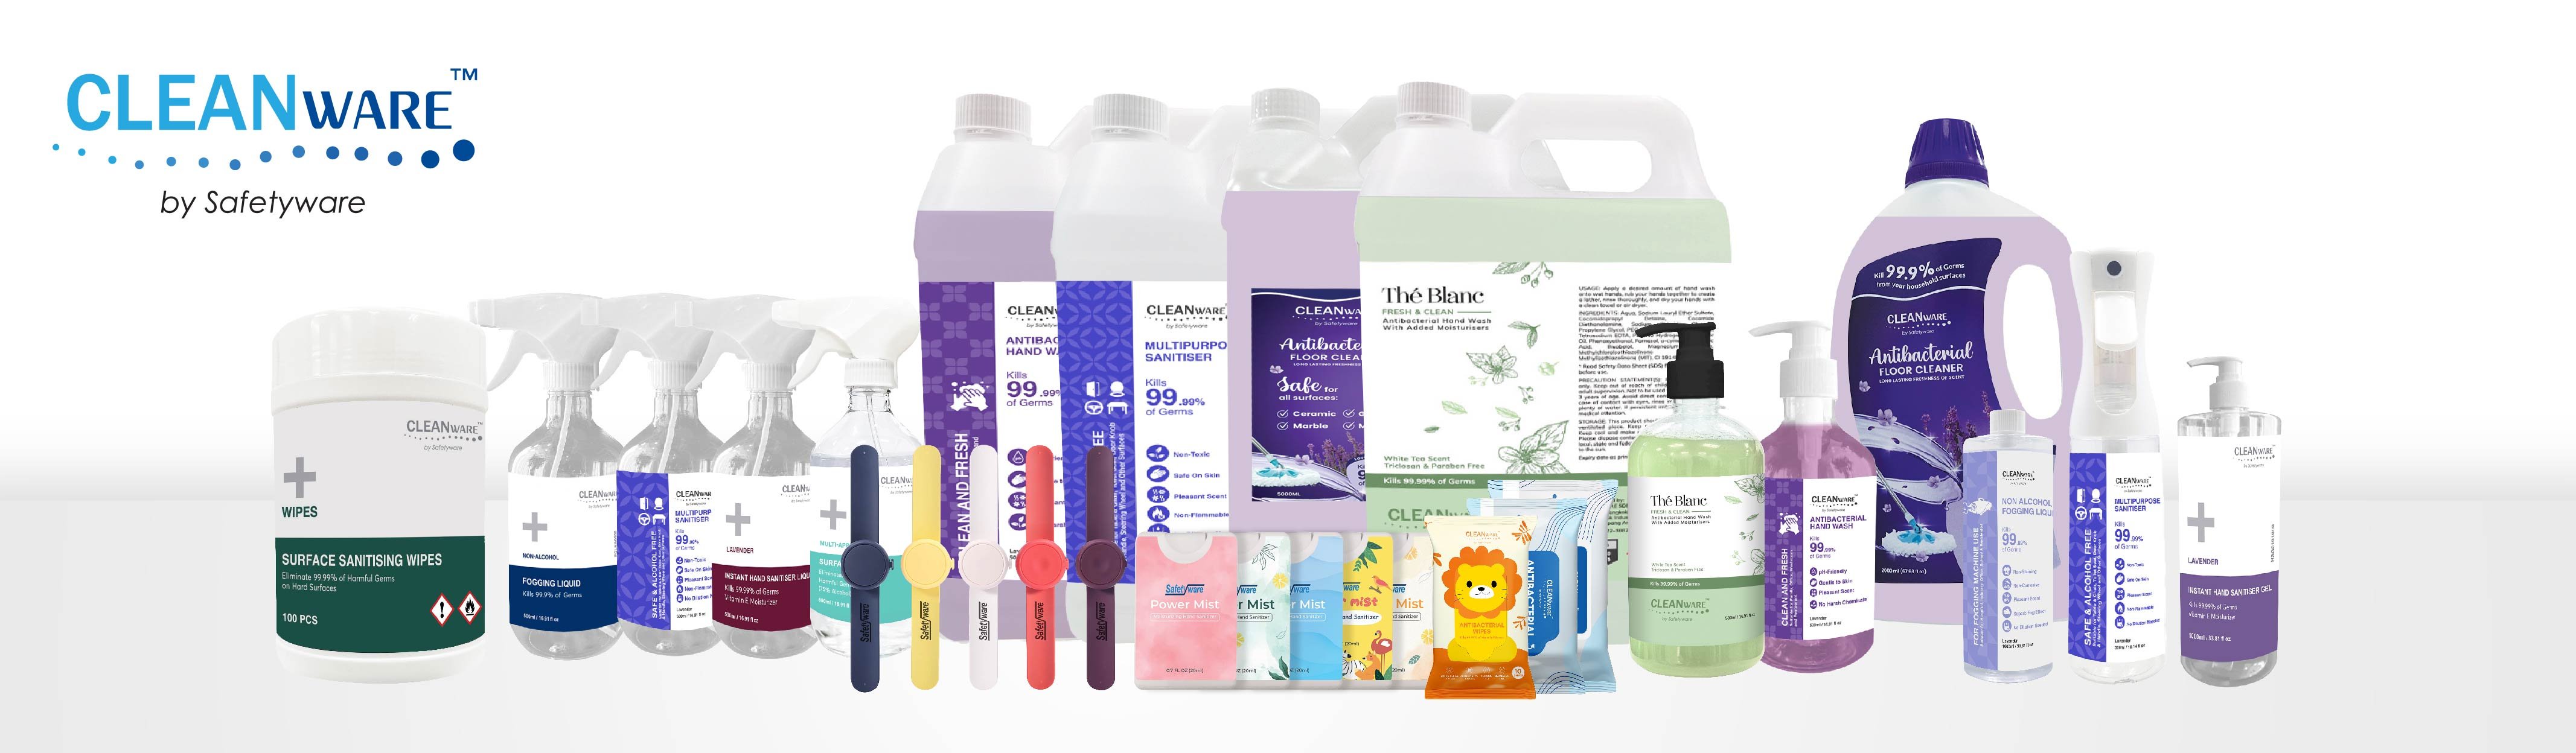 Cleanware Products Lineup-01